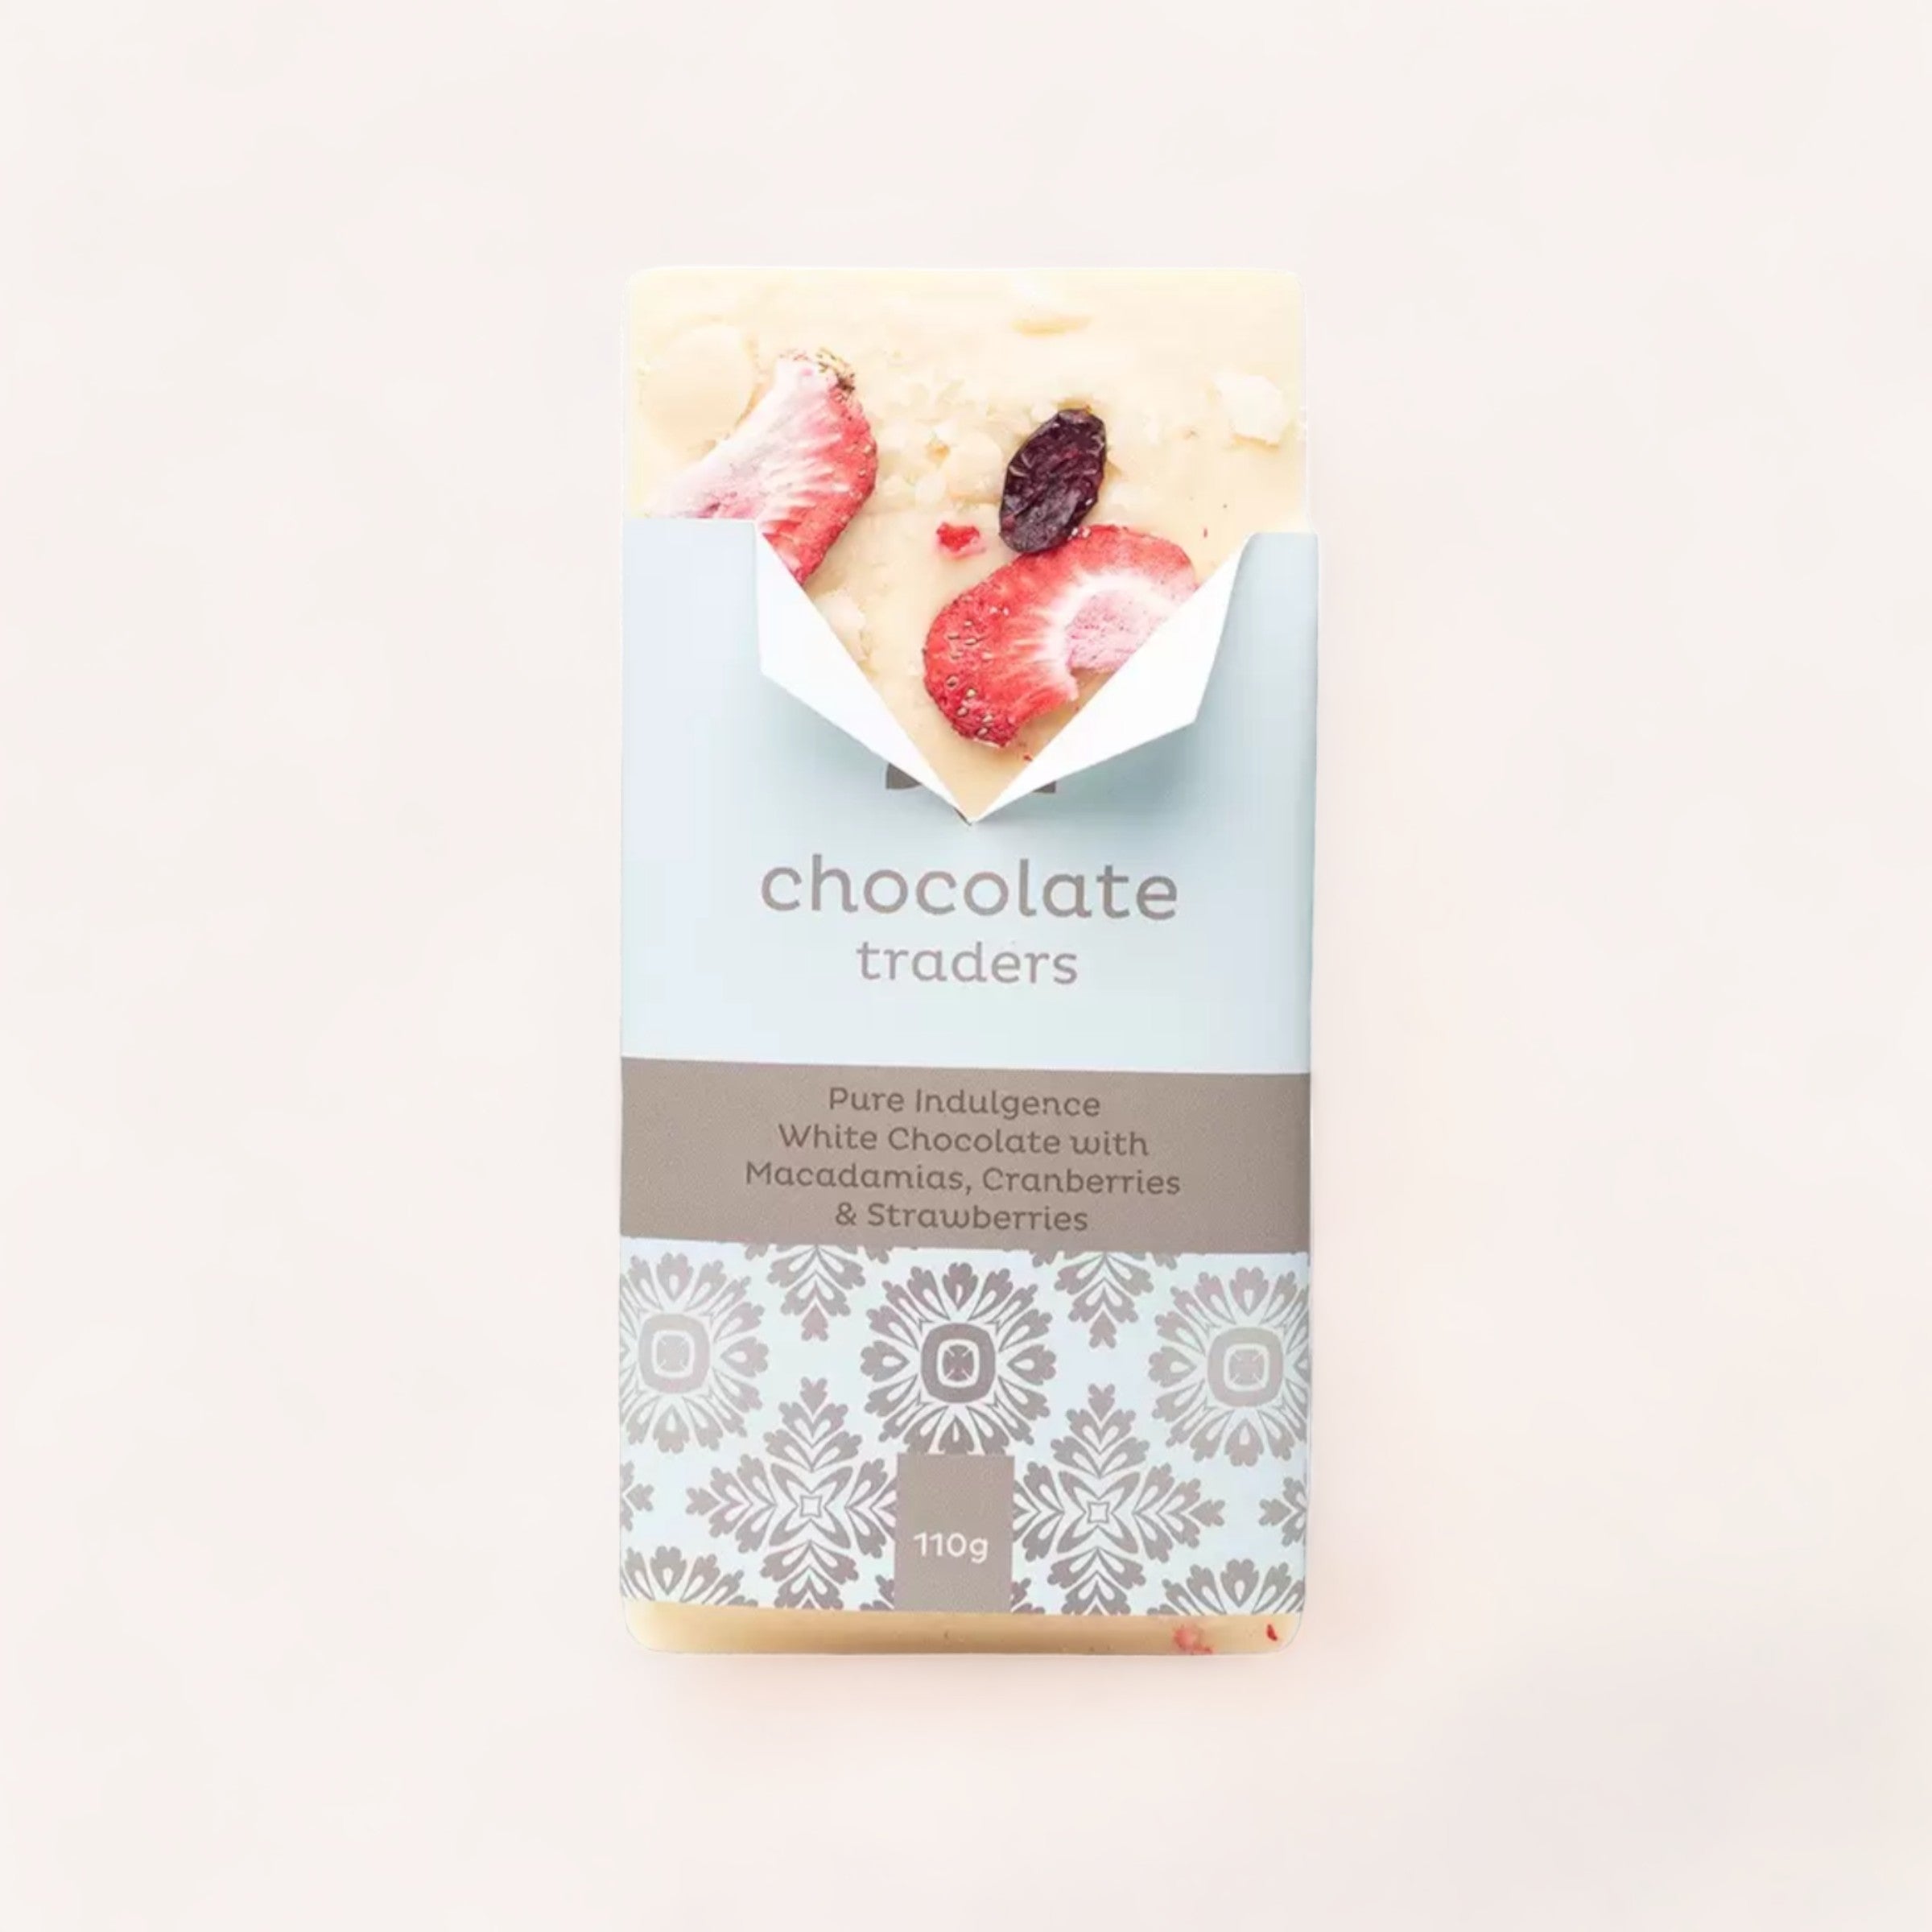 A bar of Pure Indulgence Macadamias, Cranberries & Strawberries white chocolate by Chocolate Traders, elegantly packaged with a sophisticated design, promising a pure indulgence treat. This hand-crafted product of New Zealand.